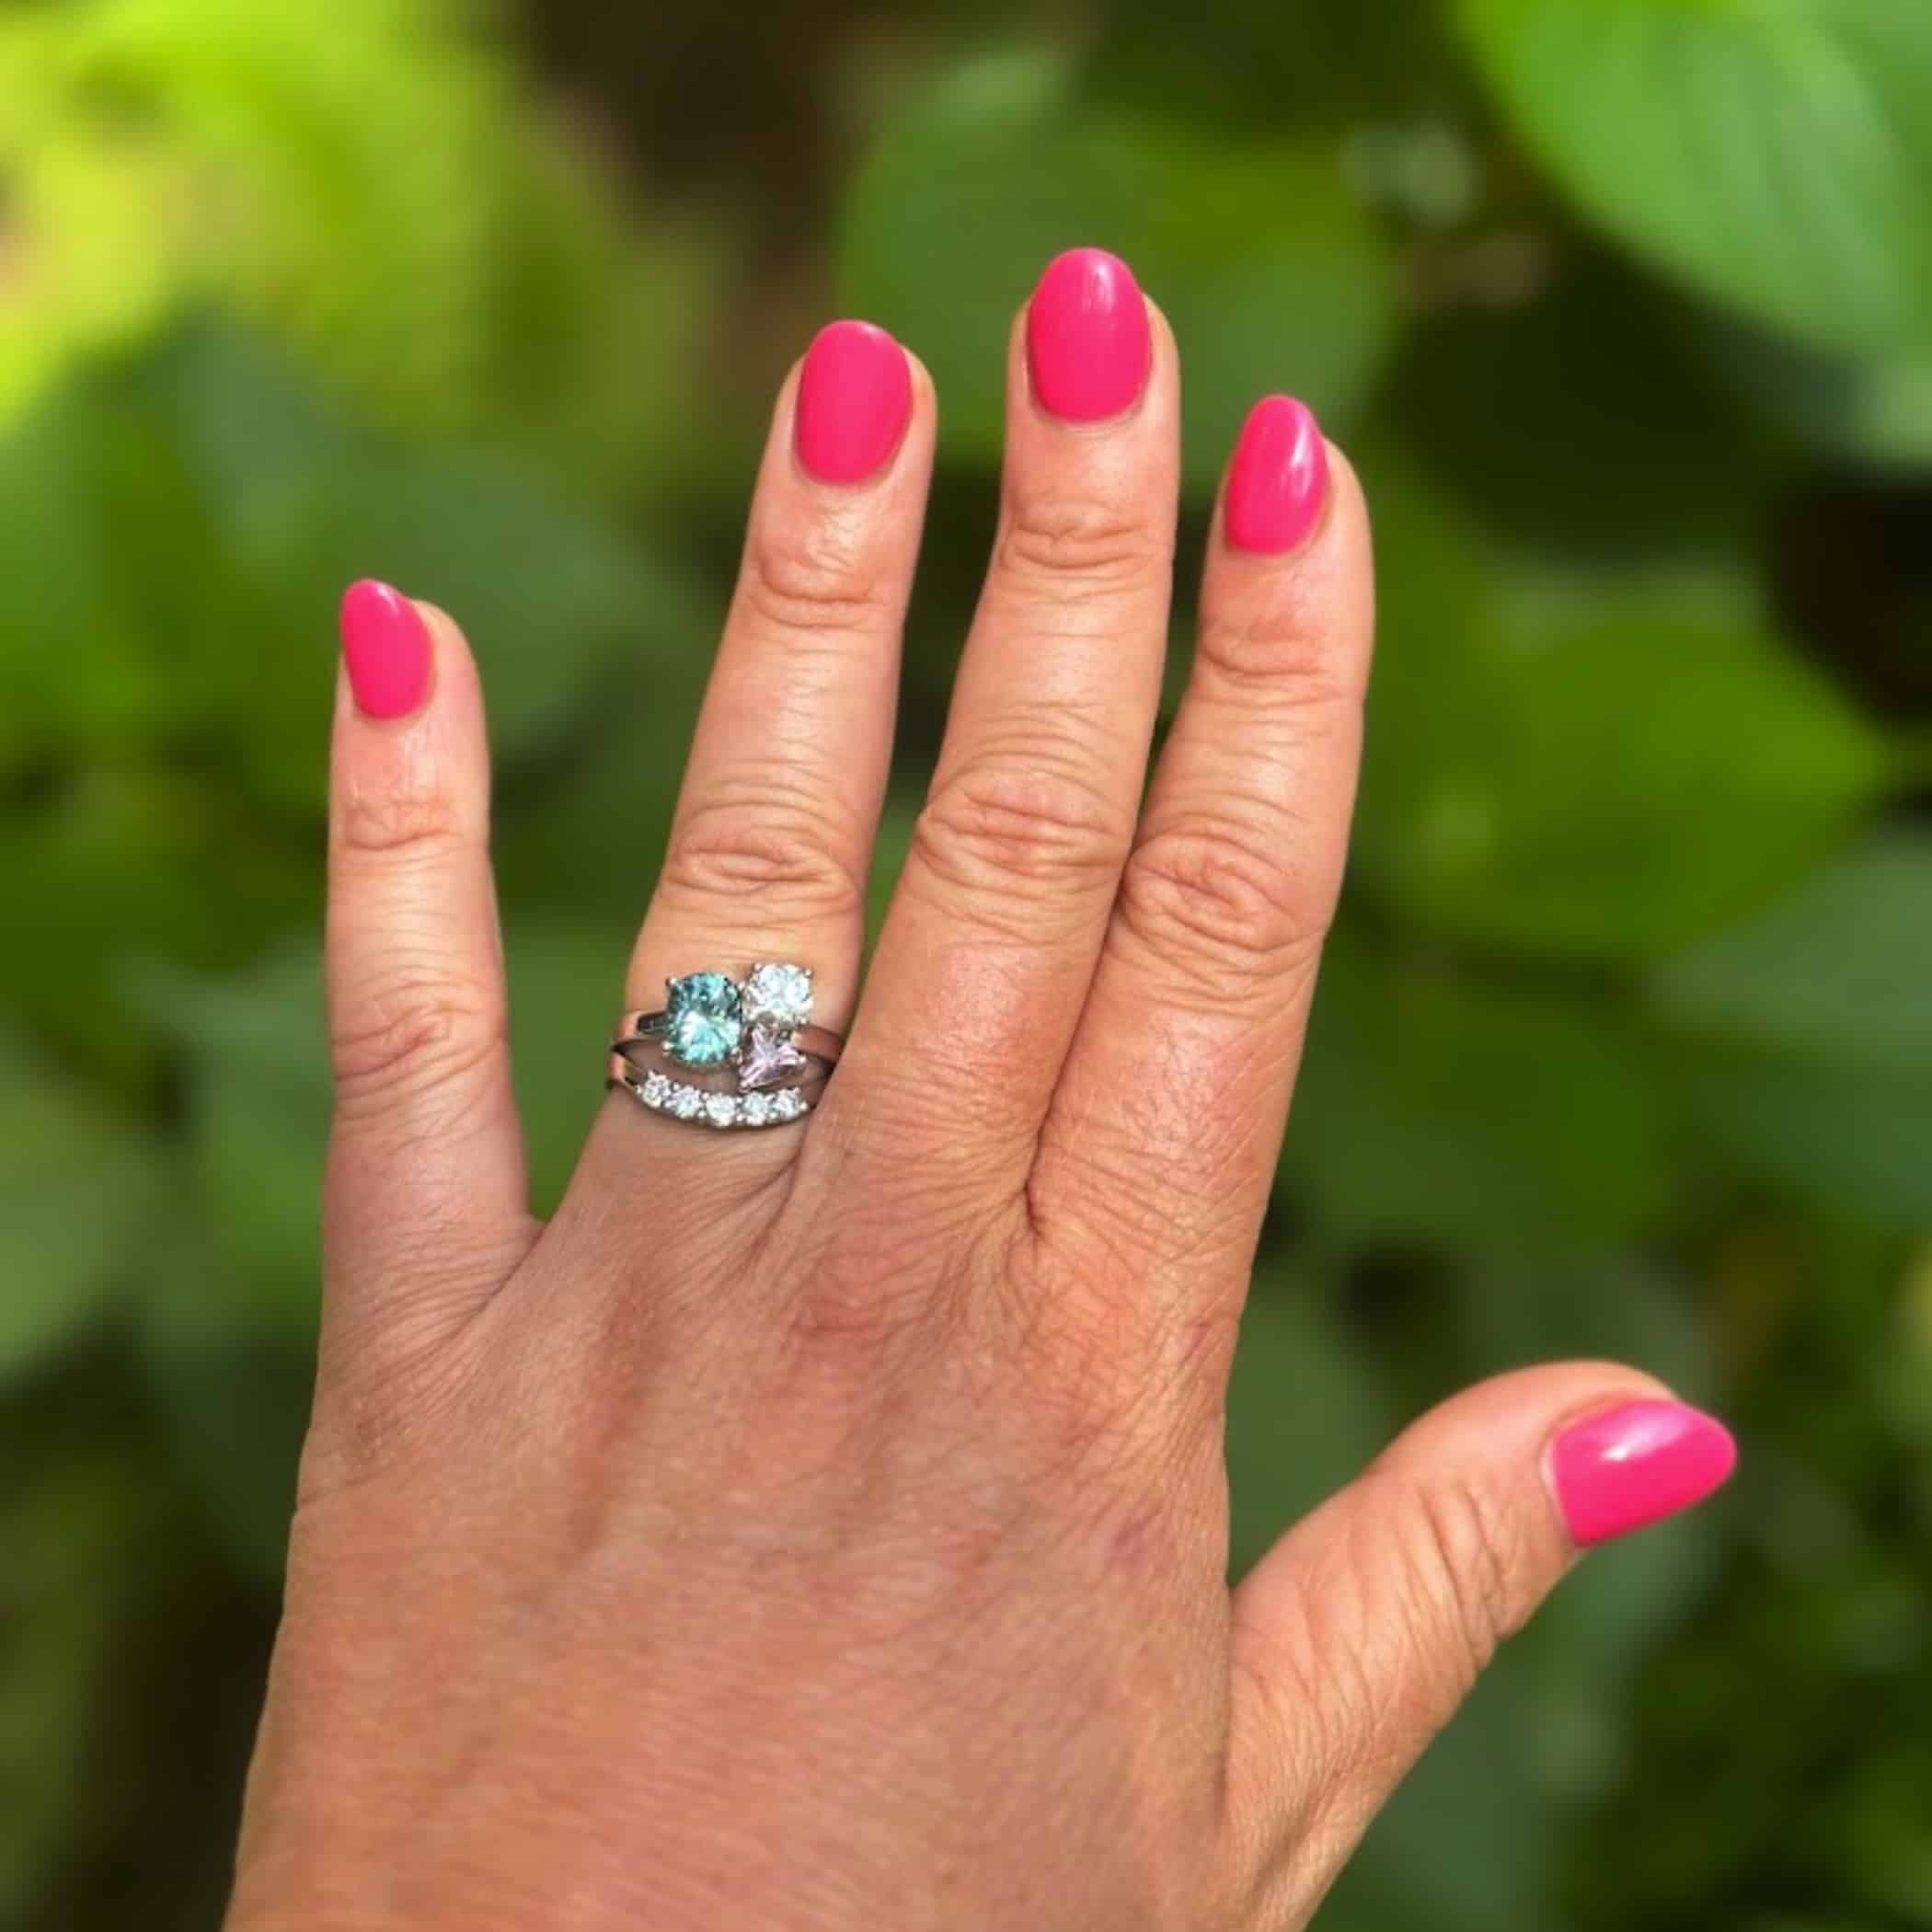 A photo from a customer review featuring a custom ring set in 14k white gold, featuring heirloom diamonds, a 2.08-carat teal sapphire, and a 0.65-carat pink sapphire